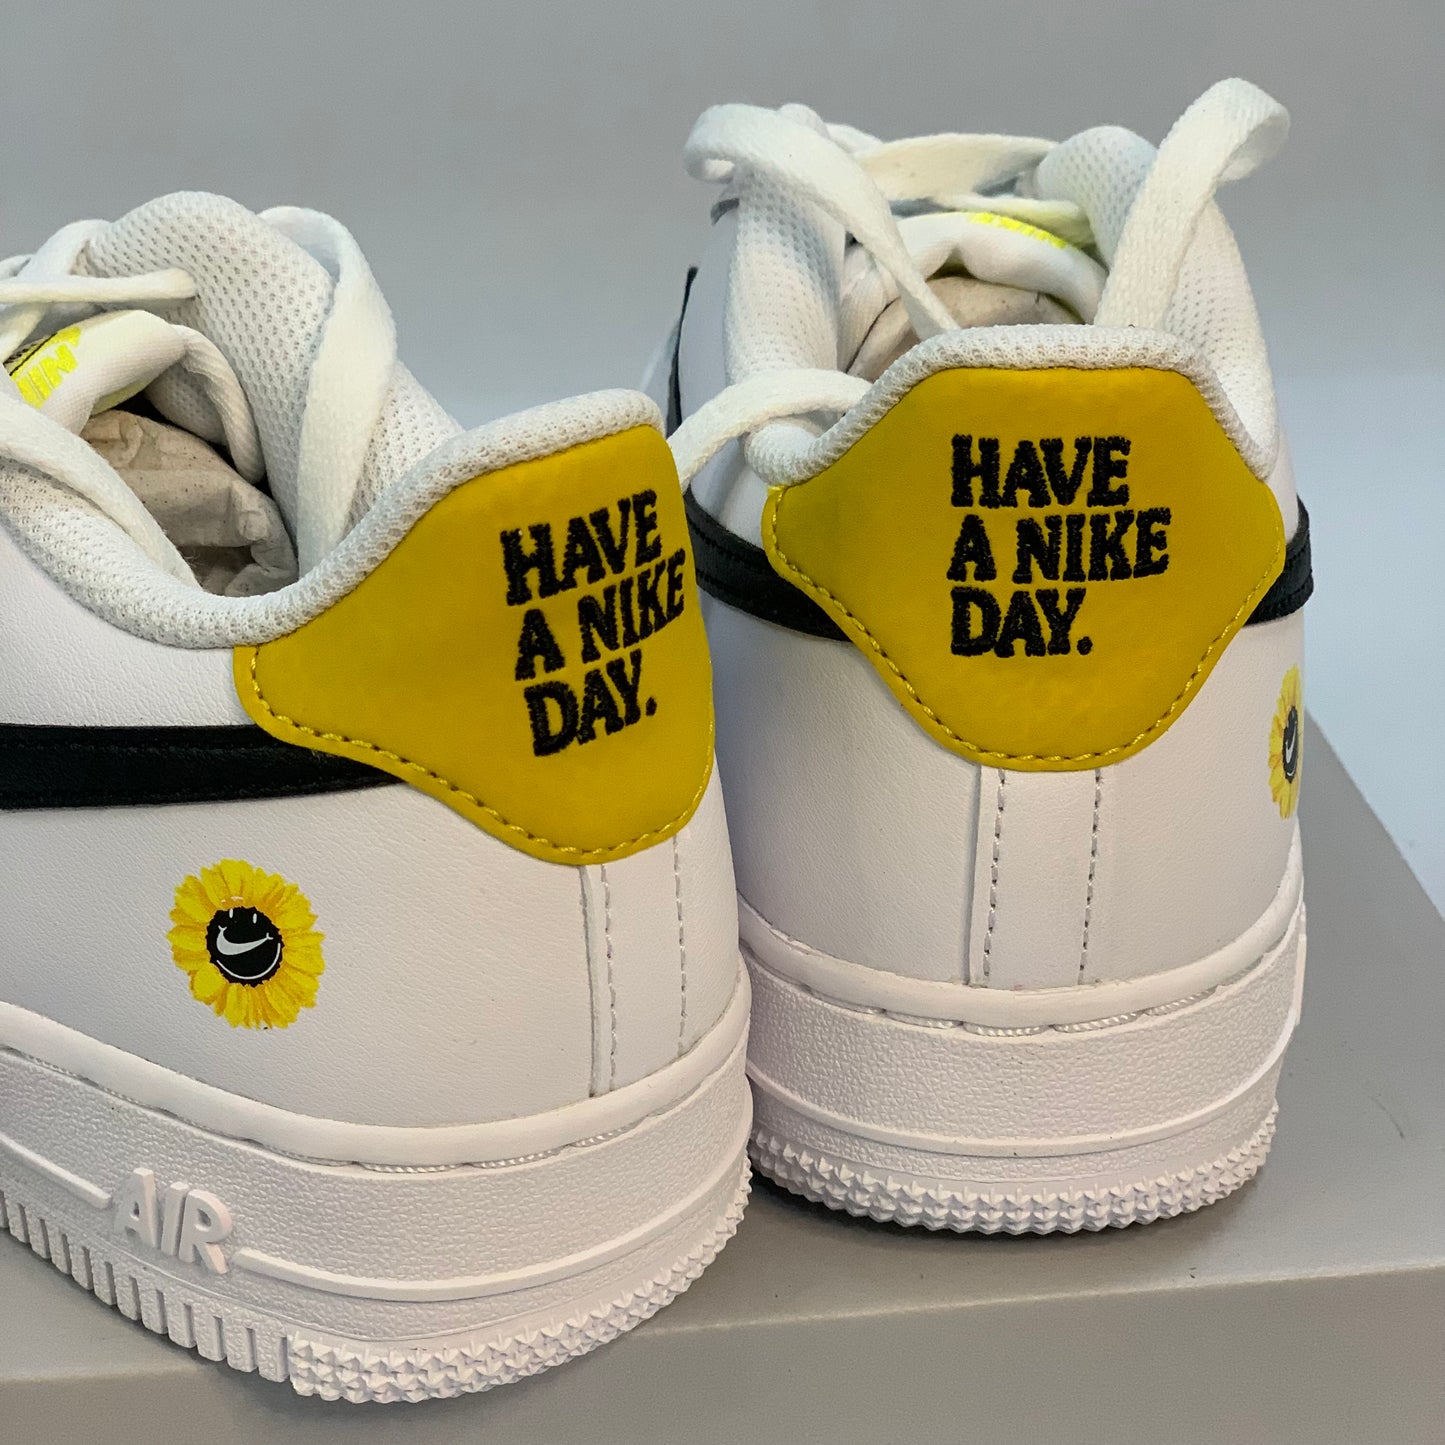 Nike Air Force 1 Low Have A Nike Day White Daisy (GS)